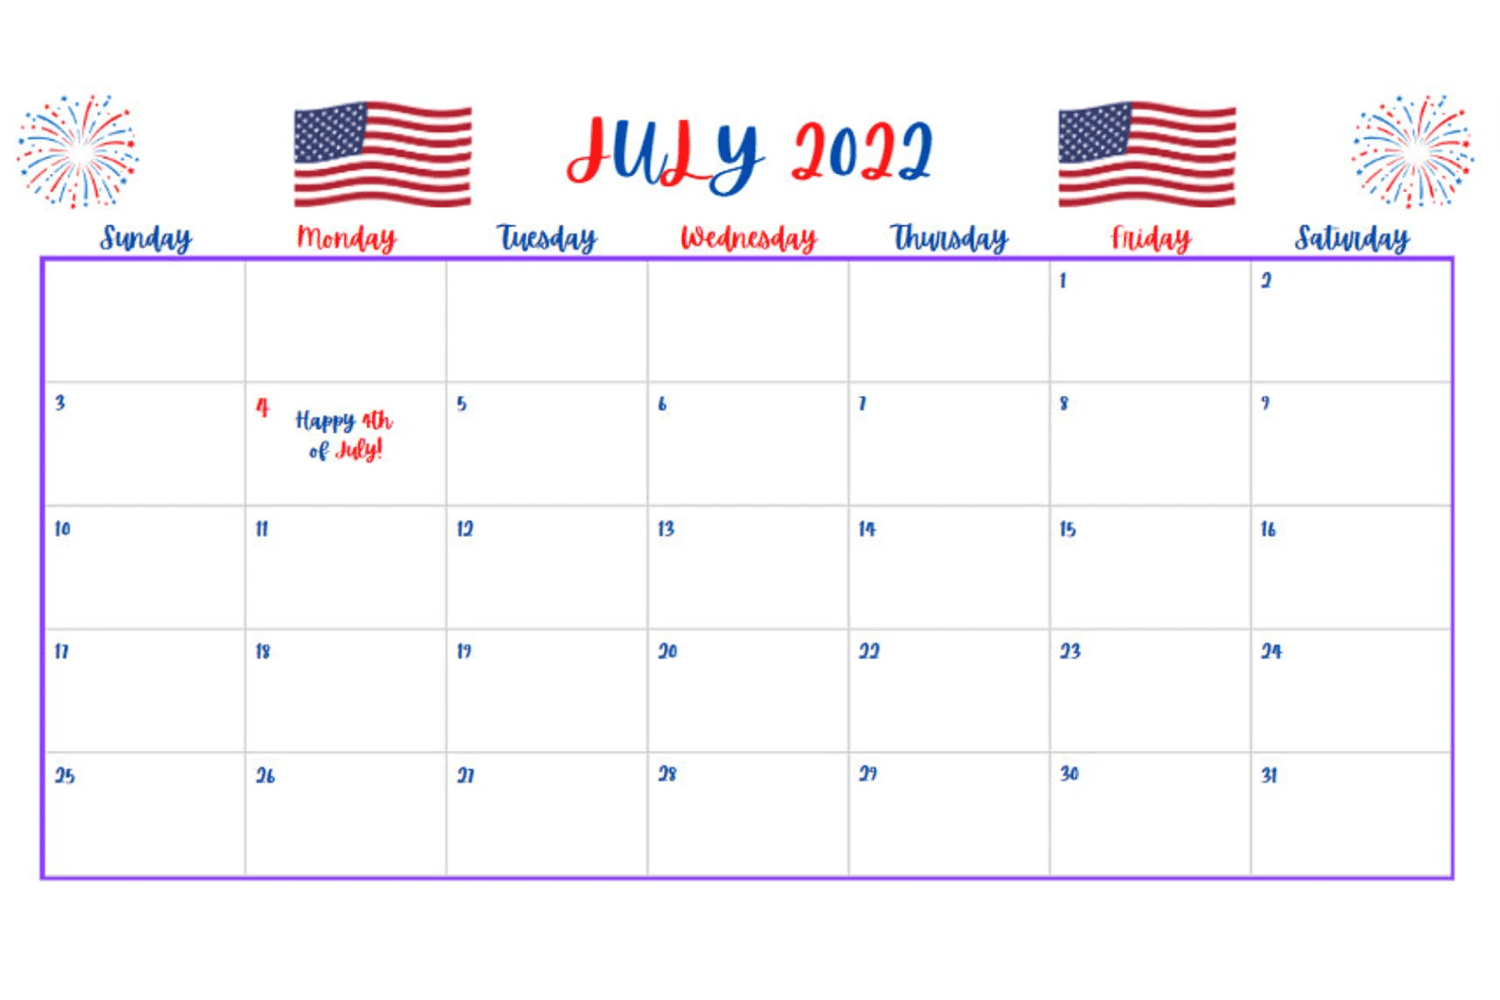 Holiday calendar in the colors of the American flag.